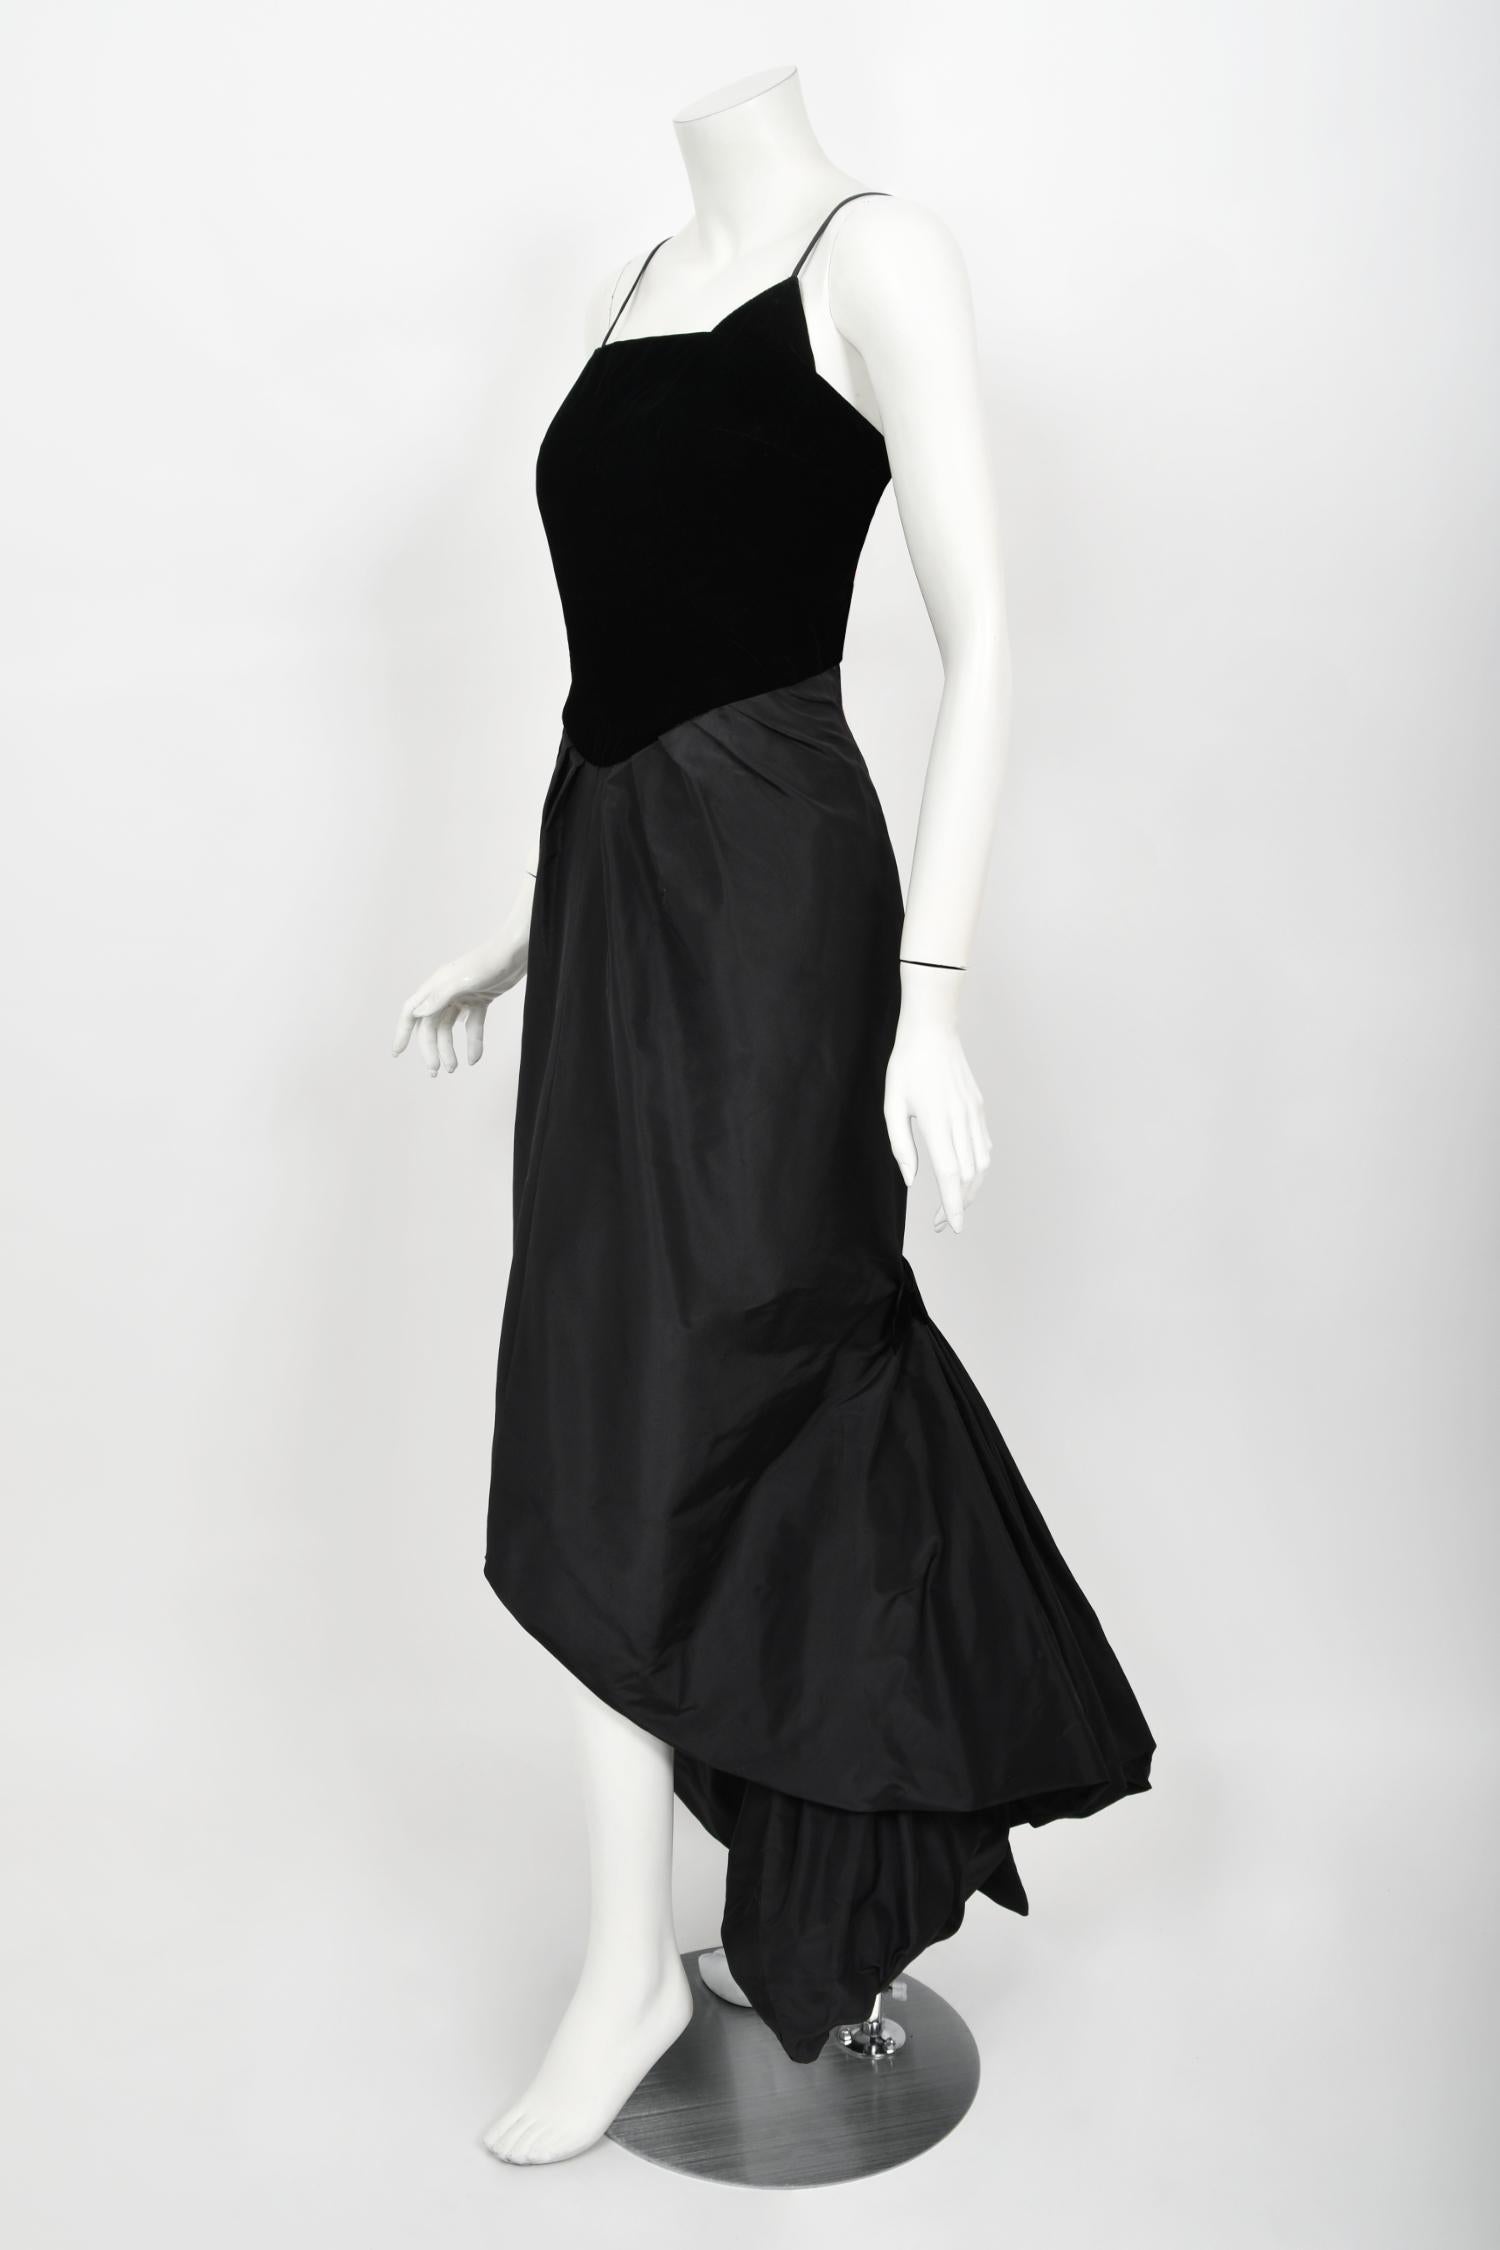 Vintage 1950's Philip Hulitar Old Hollywood Black Silk Hourglass Fishtail Dress For Sale 4